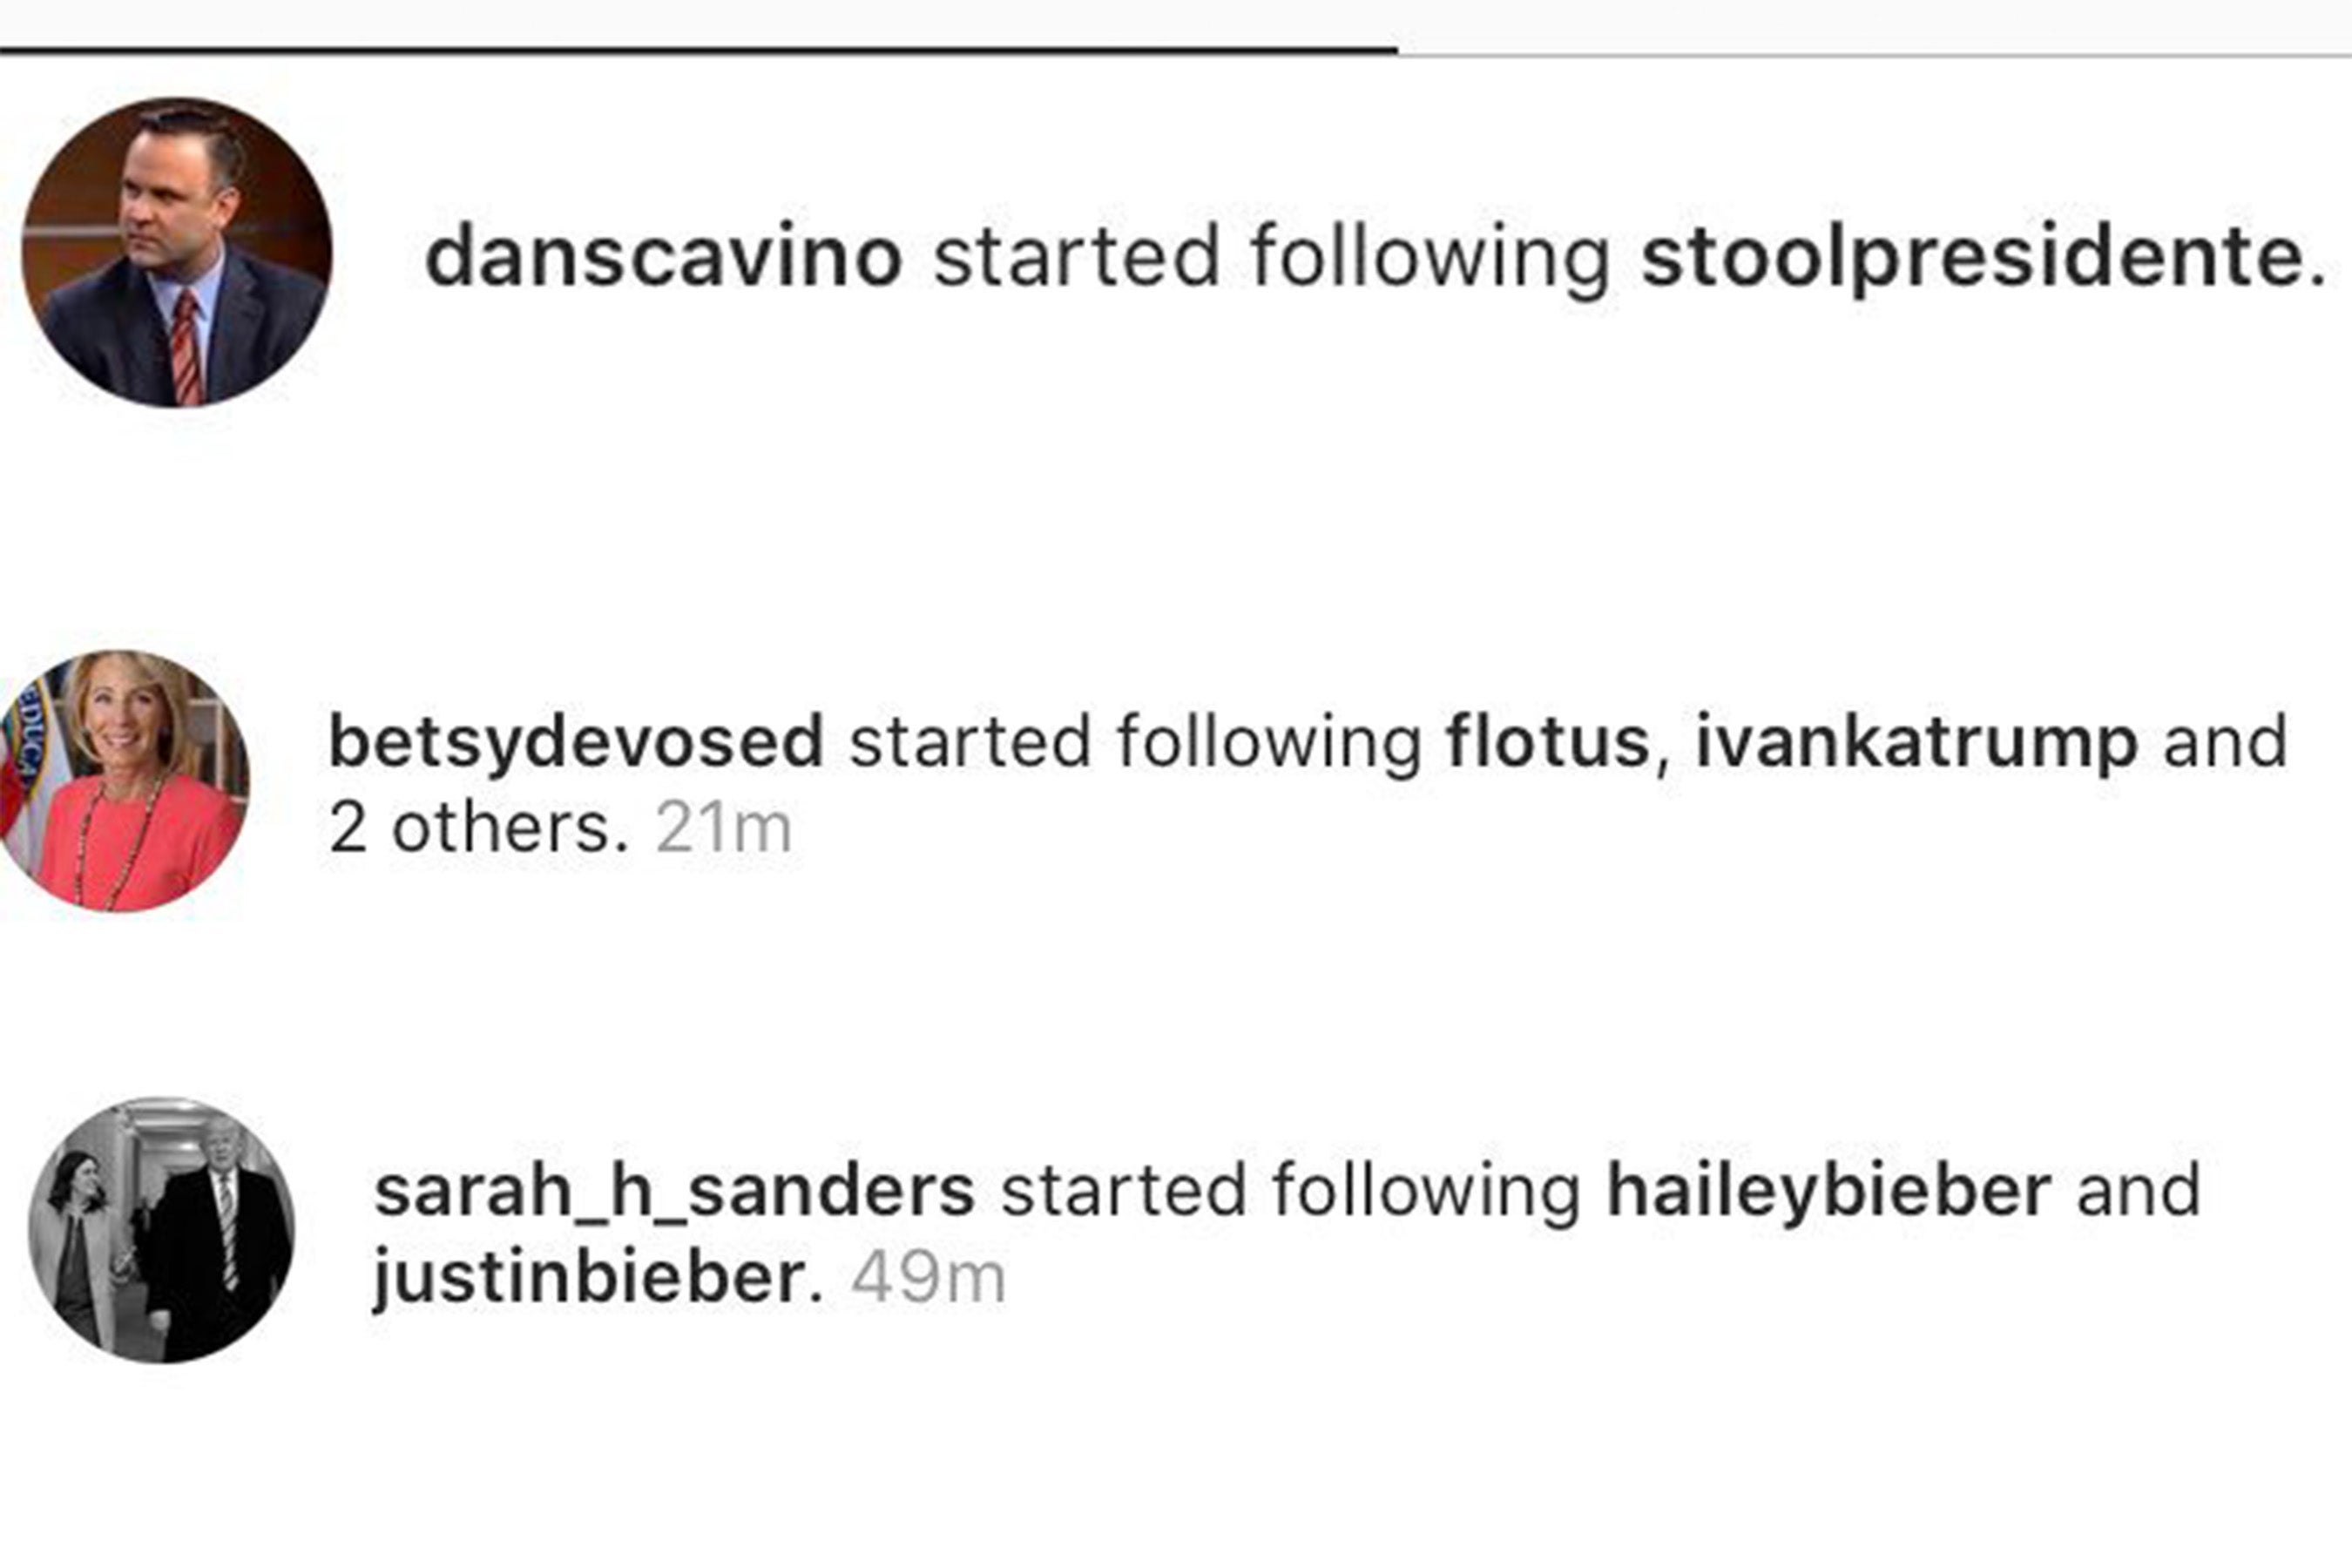 Dan Crenshaw, Betsy DeVos, and Sarah Huckabee Sanders follow David Portnoy, the Trump women, and Hailey and Justin Bieber, respectively.